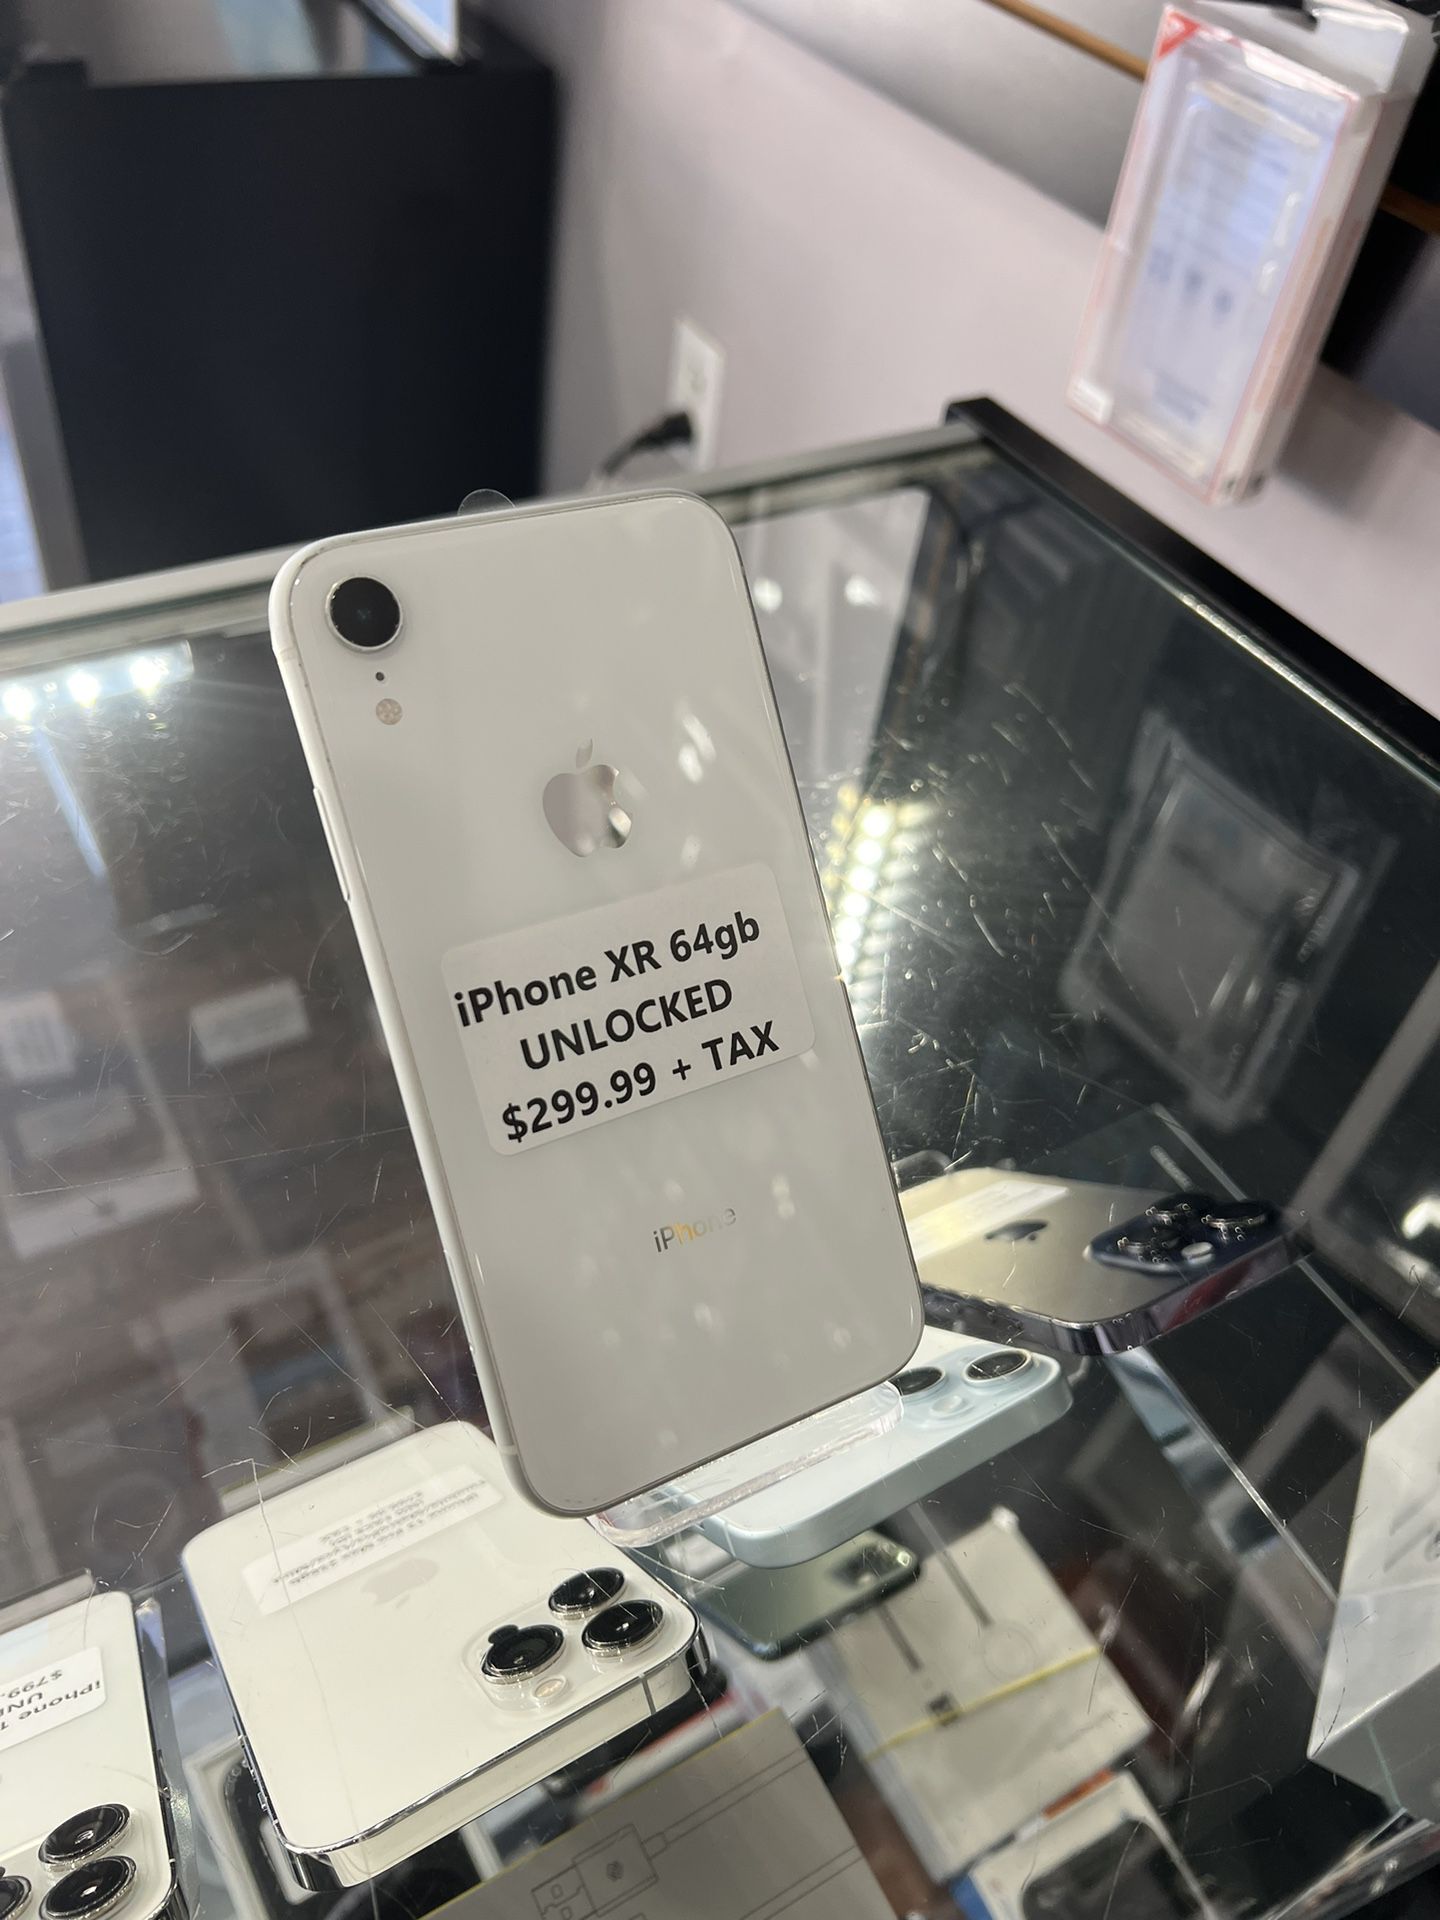 iPhone XR 64gb Unlocked for Sale in Escondido, CA - OfferUp